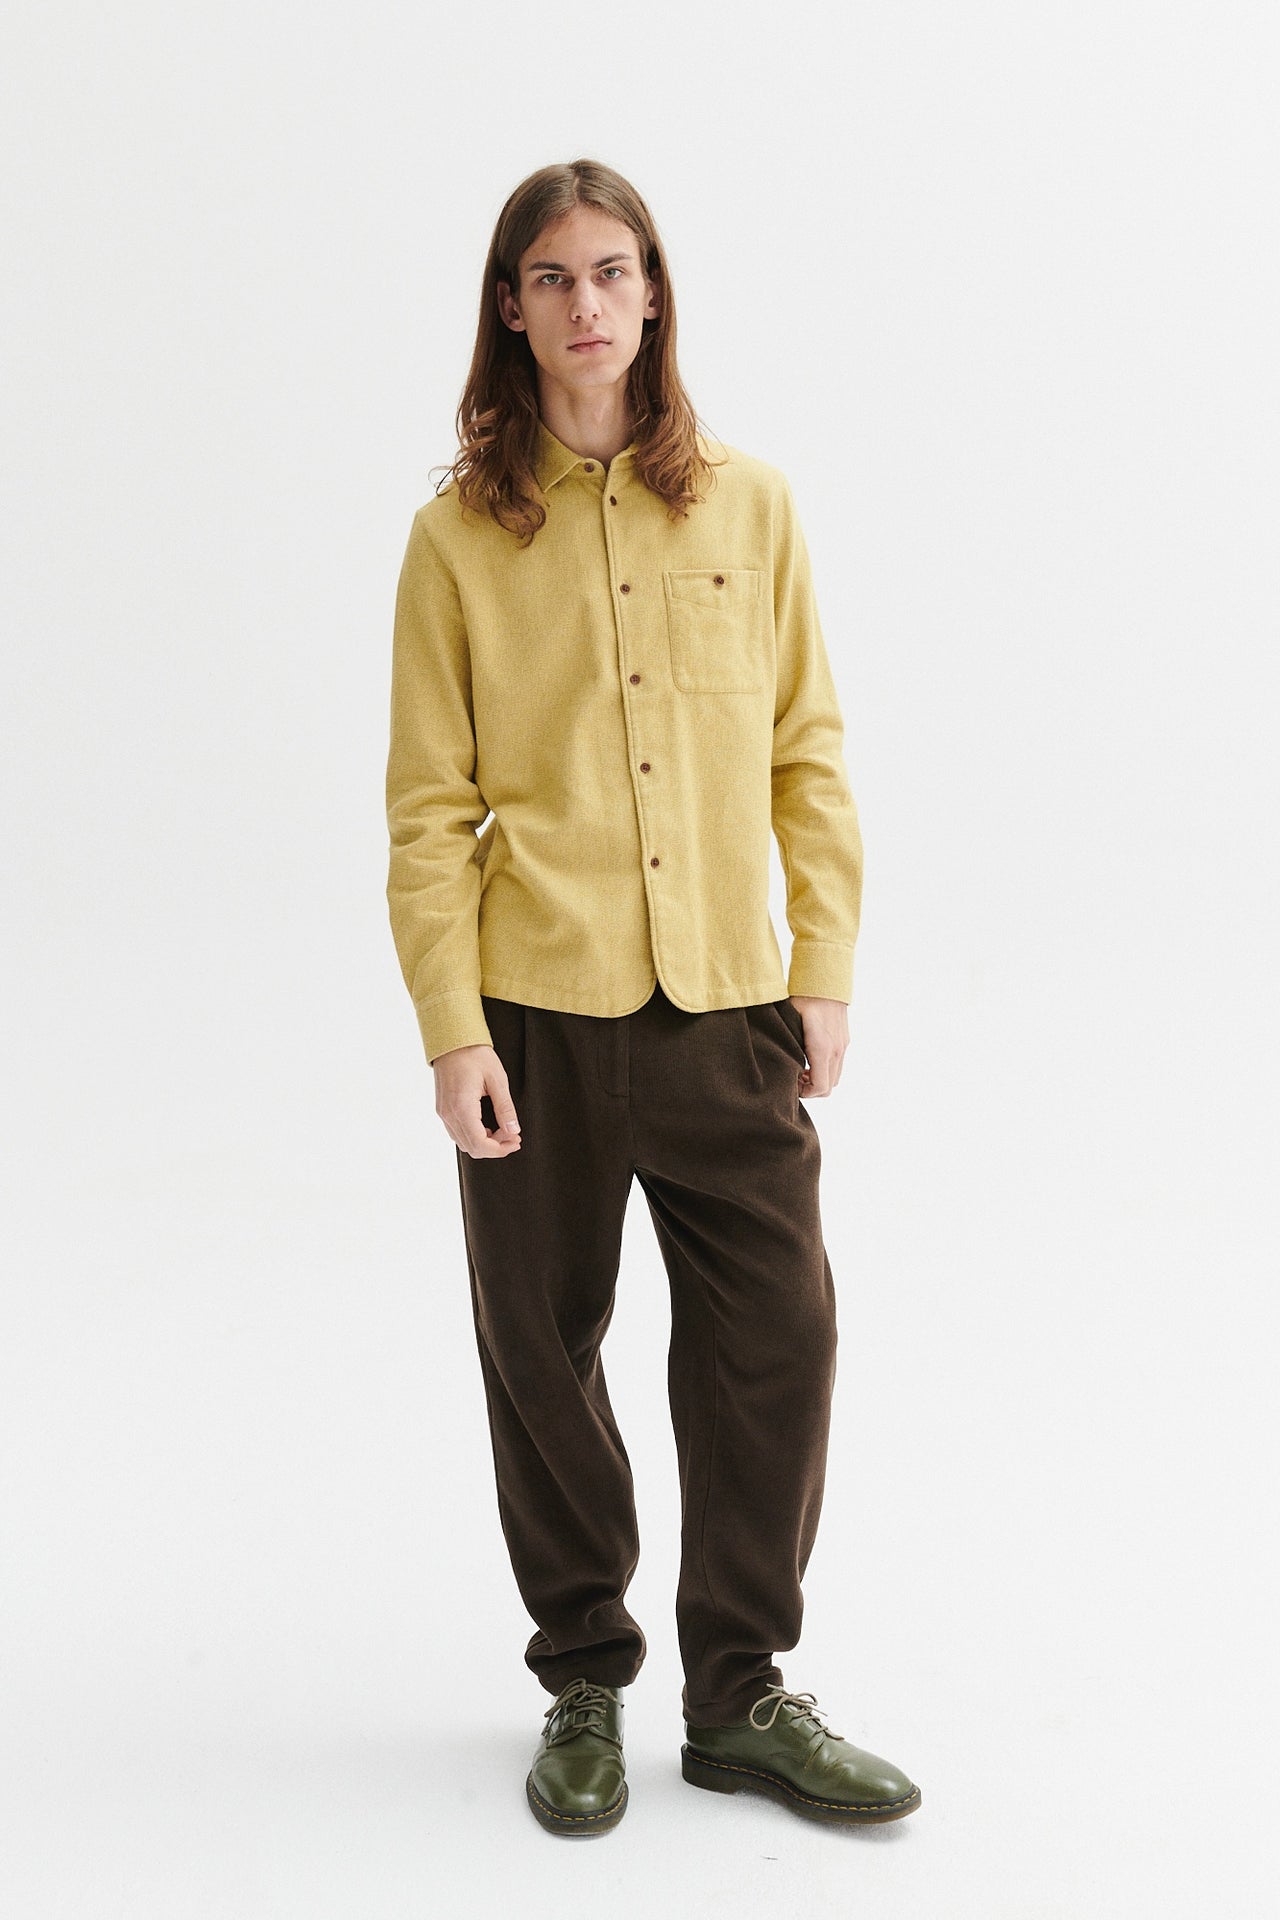 Strong Shirt in the Finest Yellow and Beige Portuguese Cotton Flannel